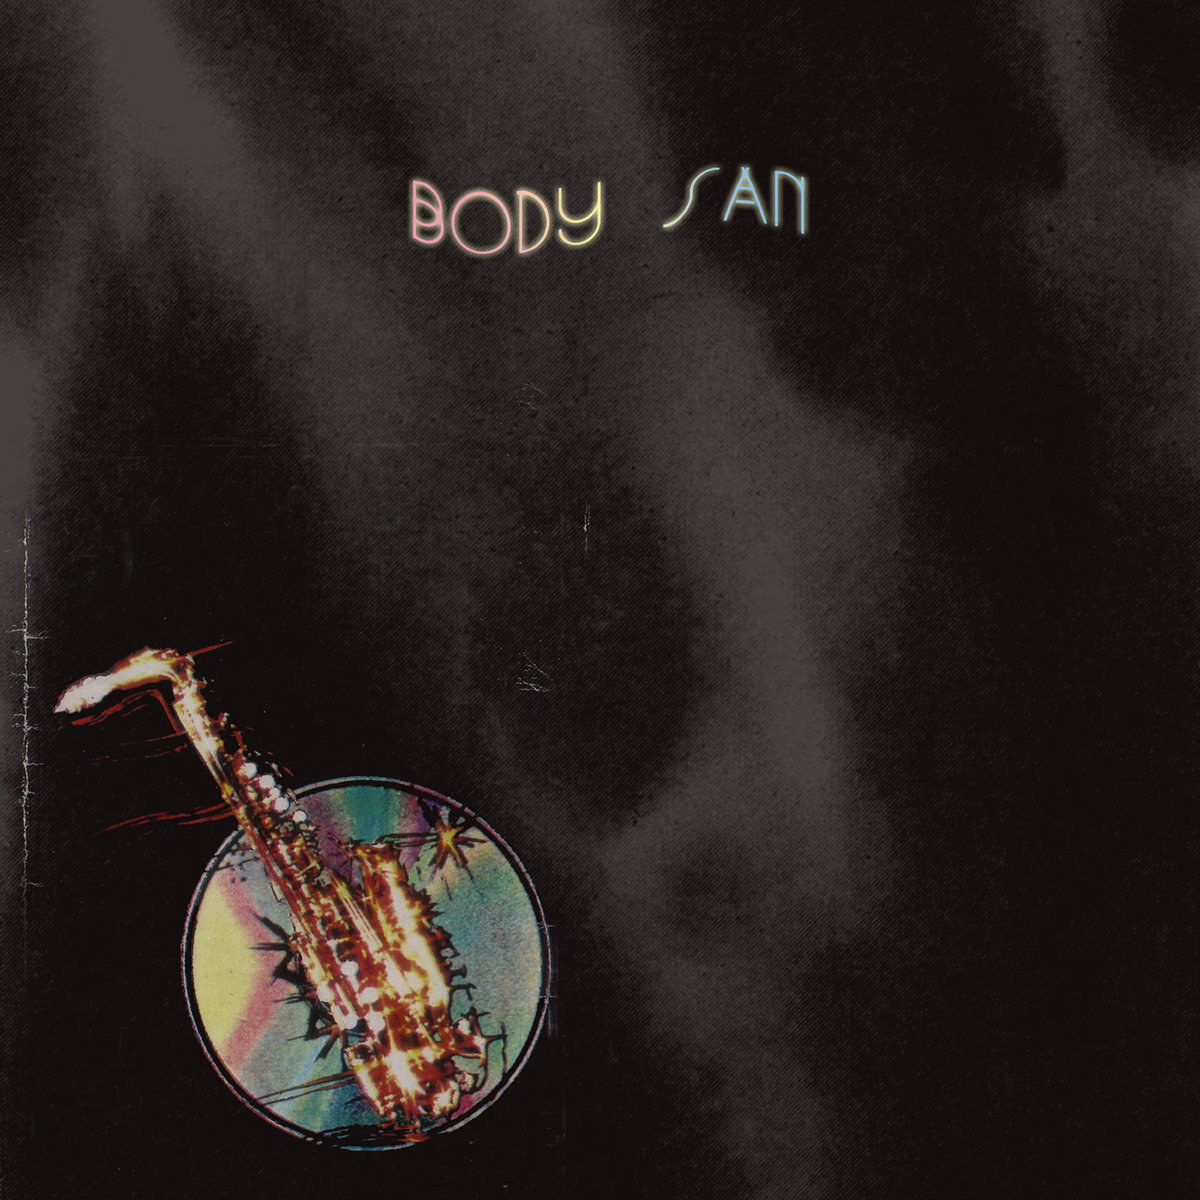 Cover artwork of Midnight by Body San